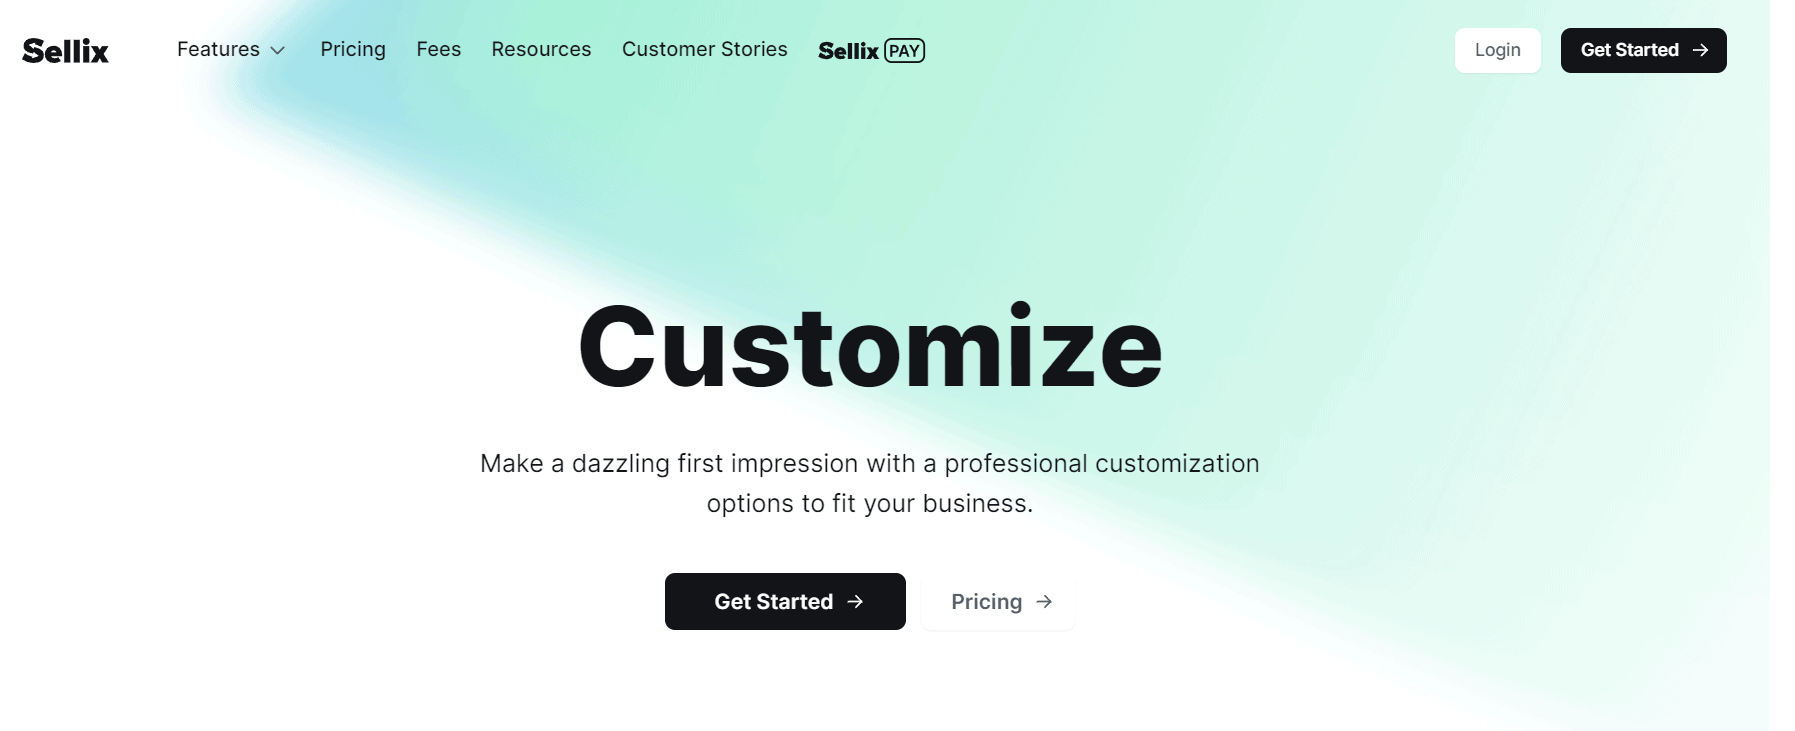 Sellix Customize Features Overview